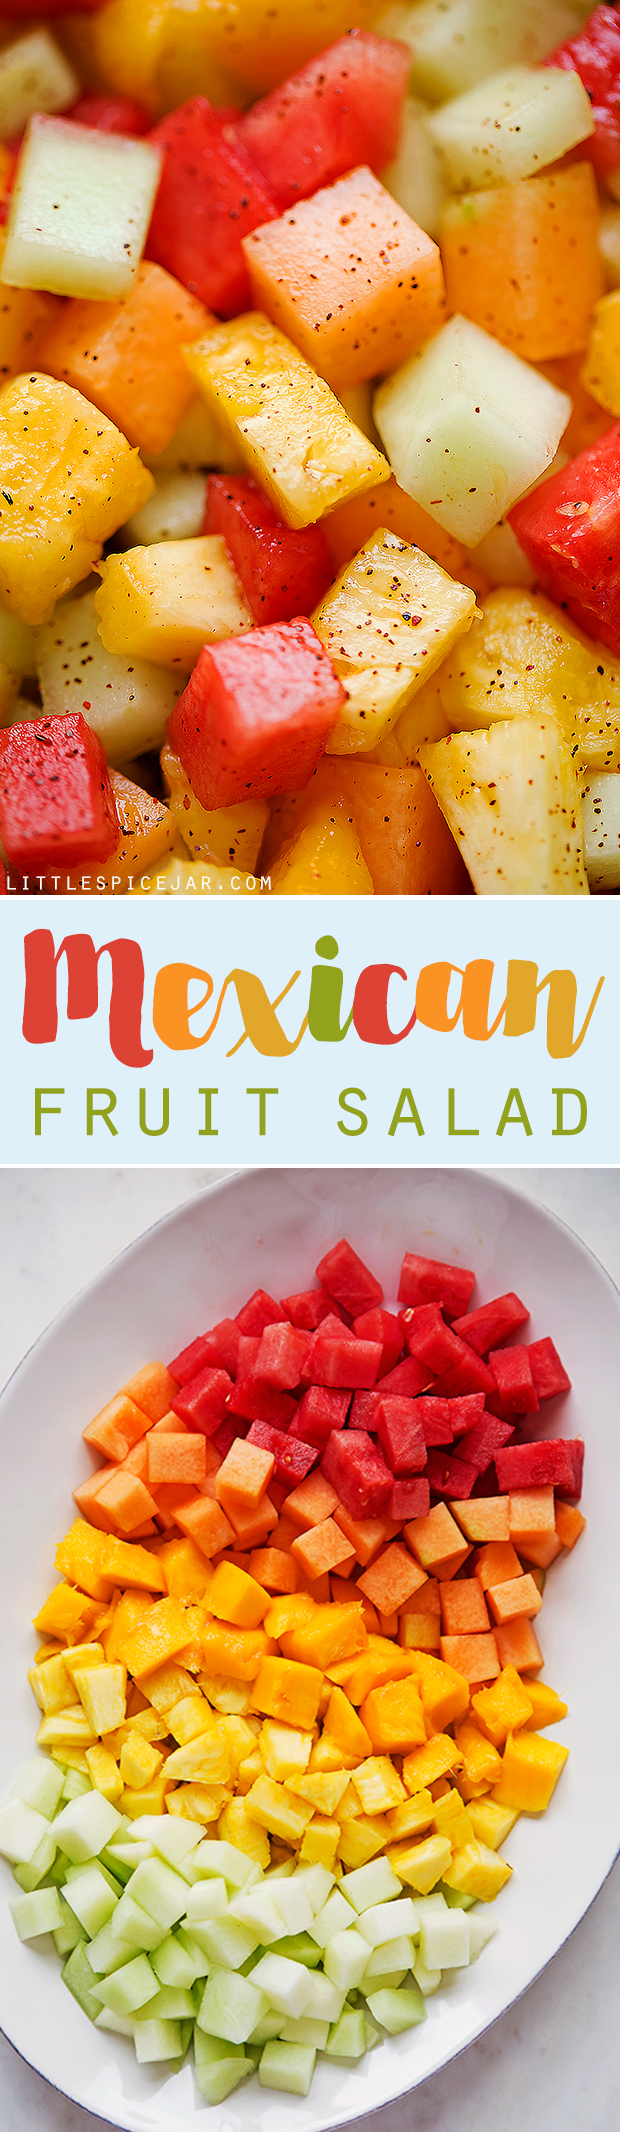 Mexican Fruit Salad - a fruit salad that combines watermelon, cantaloupe, honey dew, and mangoes that are tossed in a sweet spicy dressing! Perfect for summer! #mexicanfruit #fruitsalad #salad #mexicanfruitsalad | Littlespicejar.com